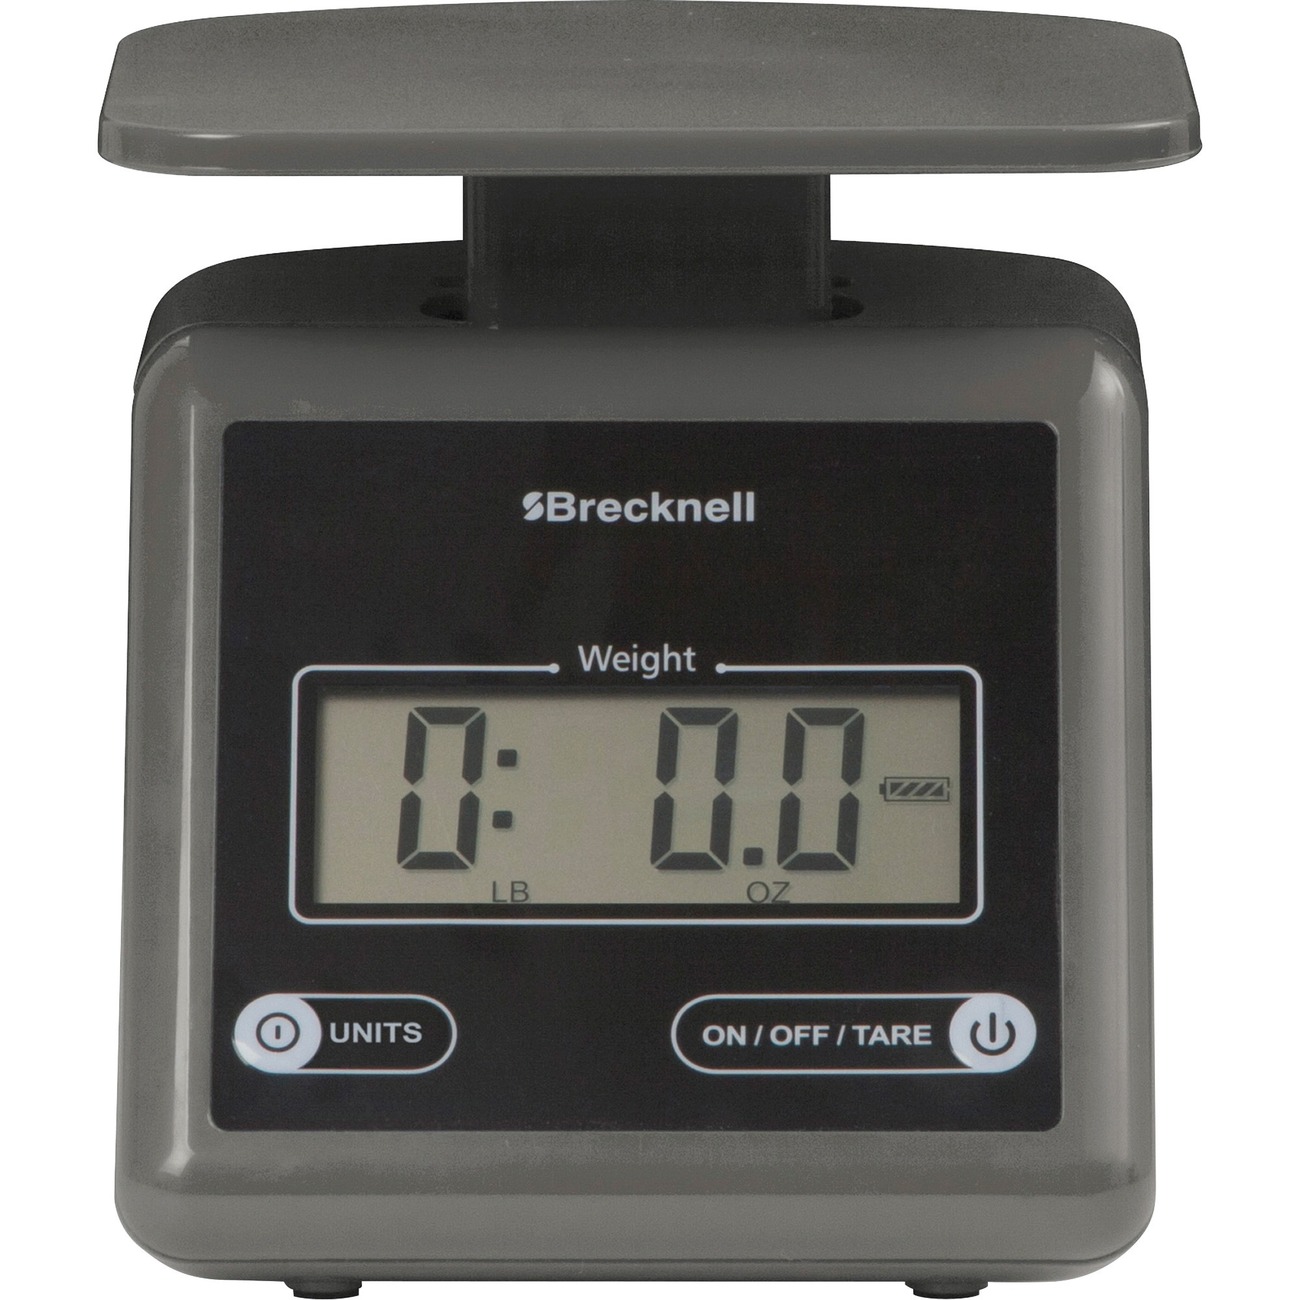 Brecknell Build Your Own Floor Scale Kit